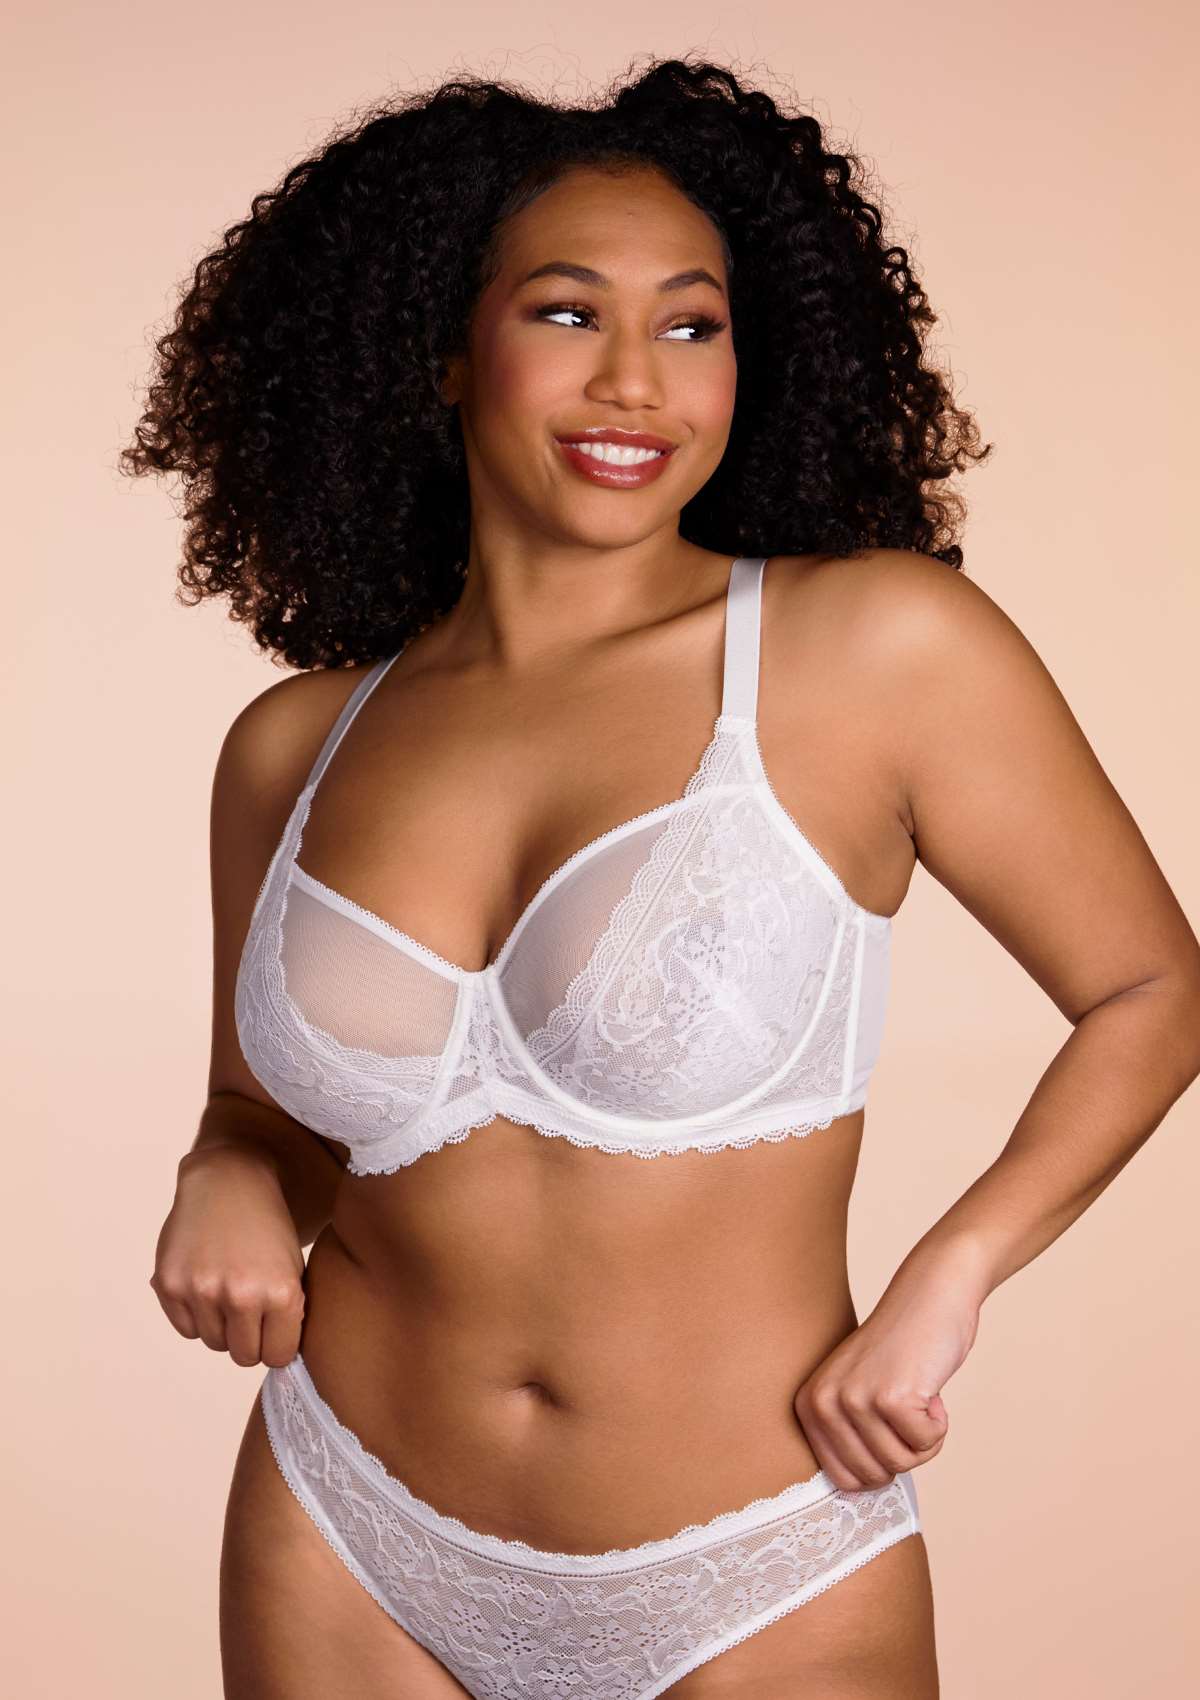 HSIA Anemone Big Bra: Best Bra For Lift And Support, Floral Bra - White / 38 / D